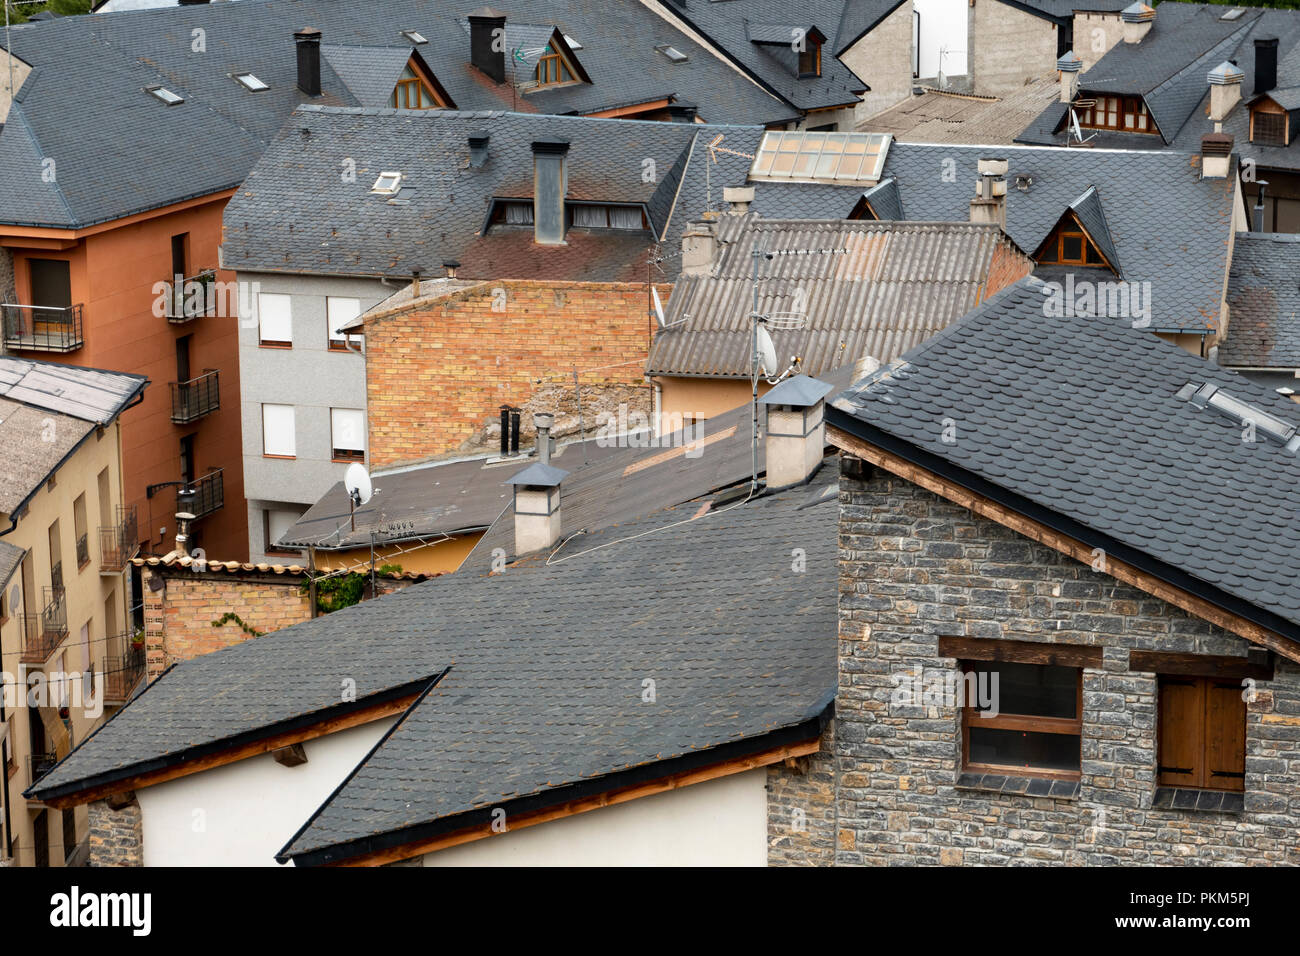 Buildings in the town of Sort, Catalonia, Spain Stock Photo